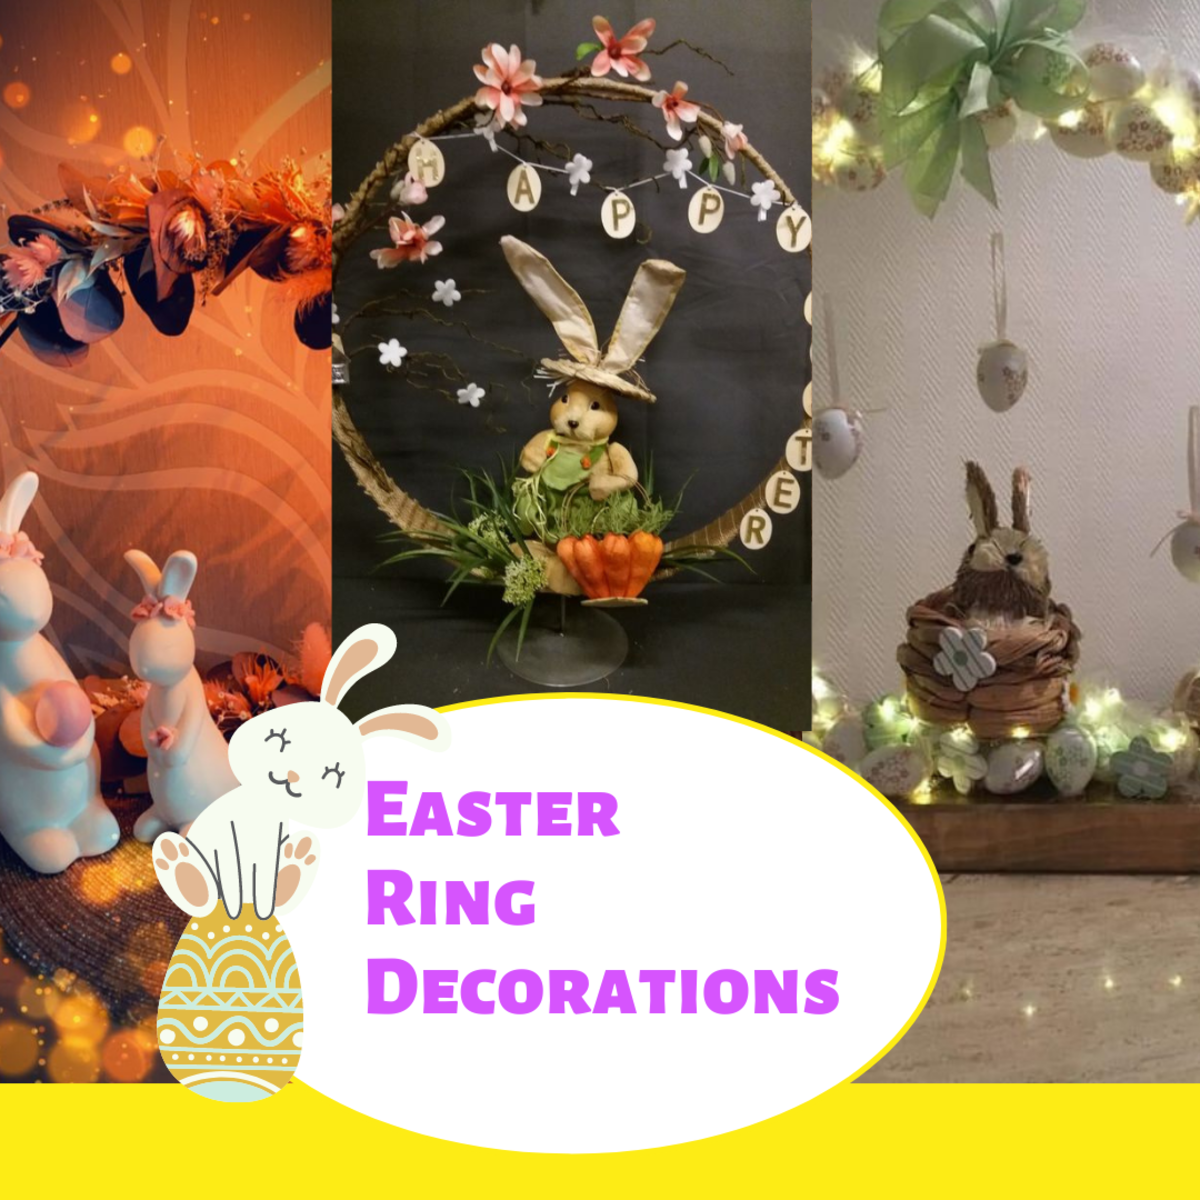 50+ Easter Dollar Store Hula Hoop Decoration Ideas That Every Bunny Should Try